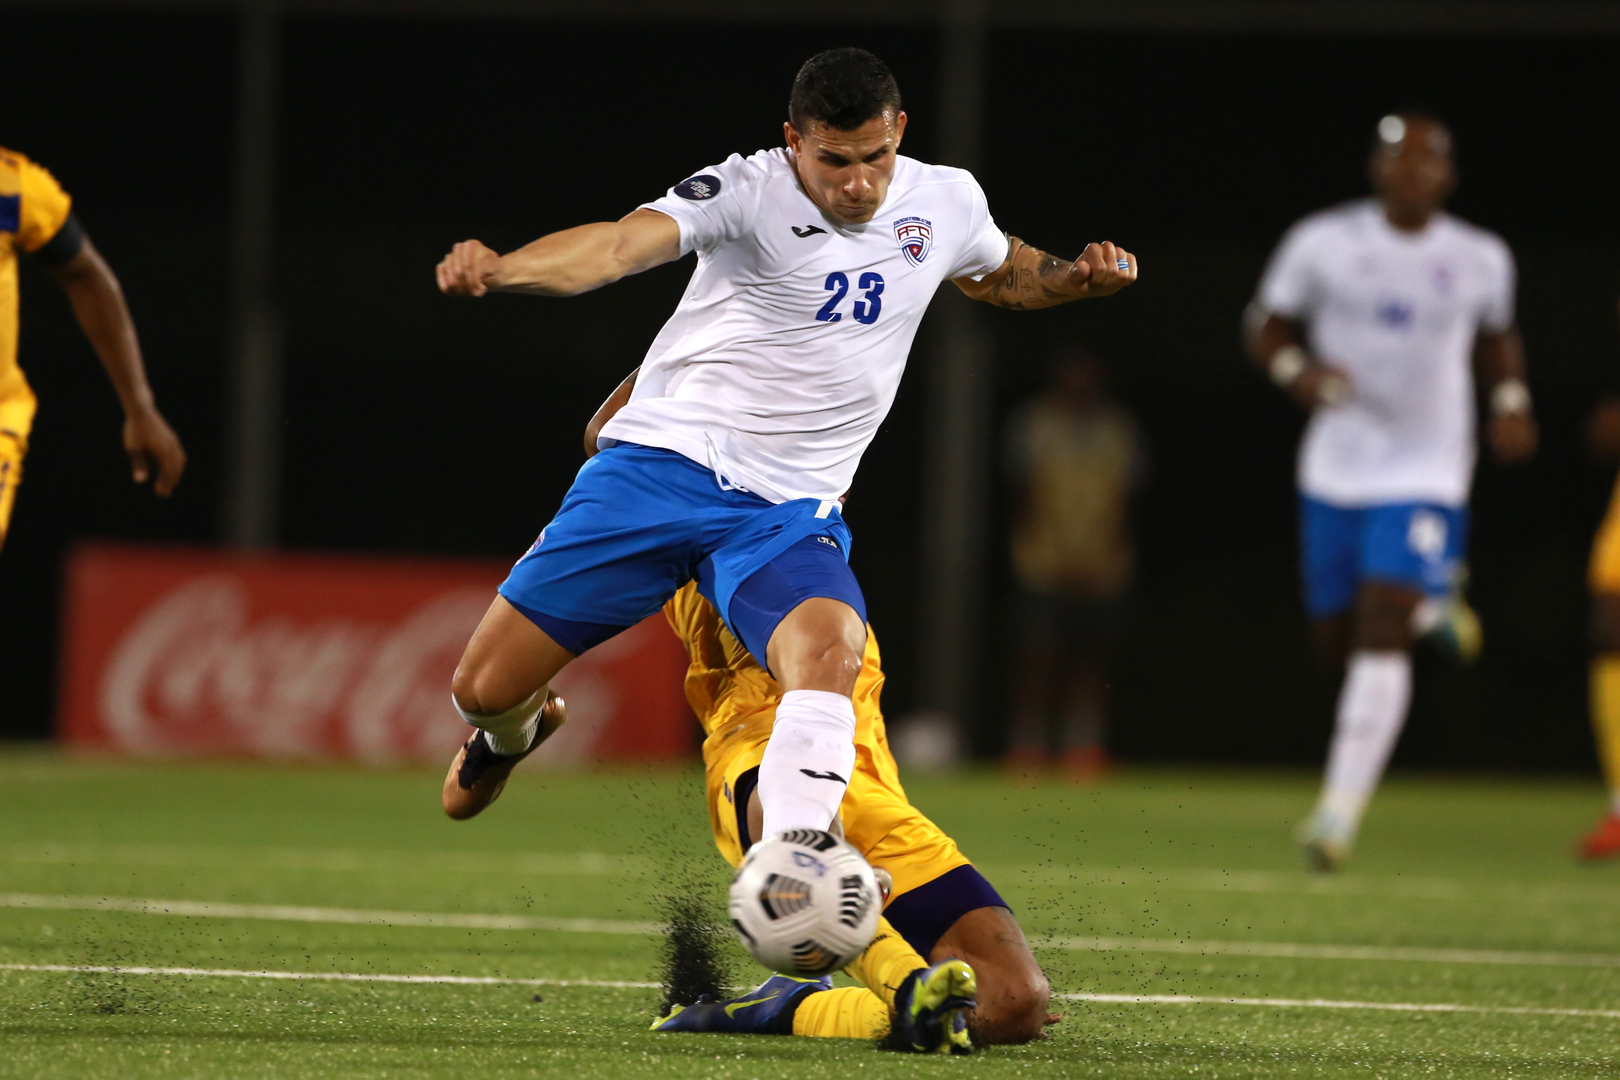 Cuban soccer player Luis Paradela plays for U.S. club without defecting -  The Washington Post